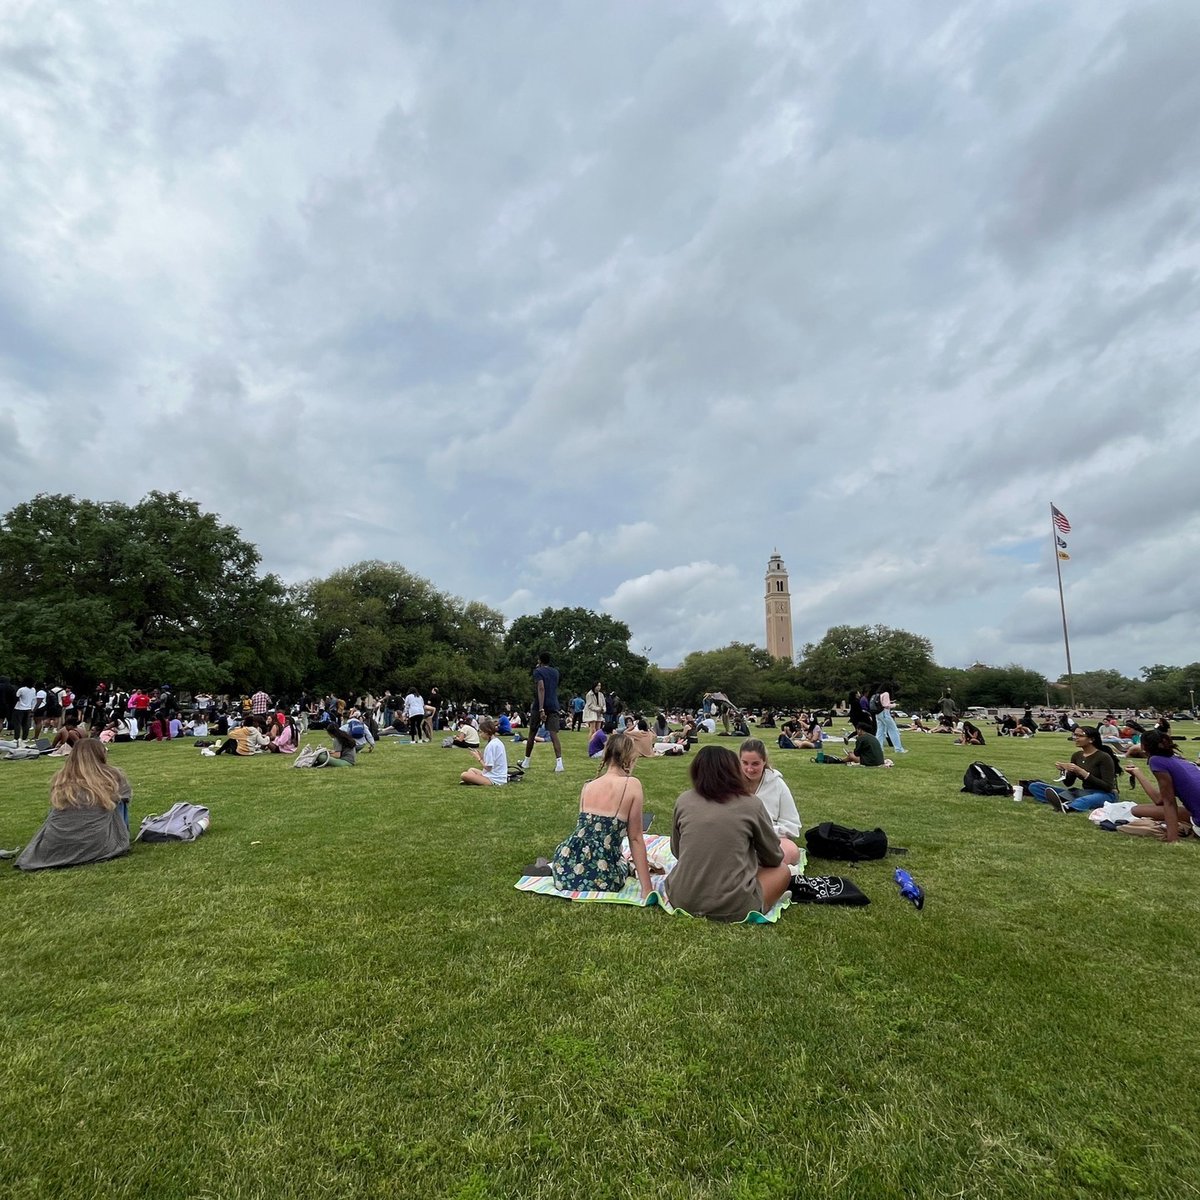 Whoomp, whoomp, whoomp... 😞 🎺 It rained on our parade... grounds! The weather didn't cooperate with the solar eclipse🌧️, but the turnout was awesome. Thanks for showing up! See you again in 2044 😅 #GeauxScience